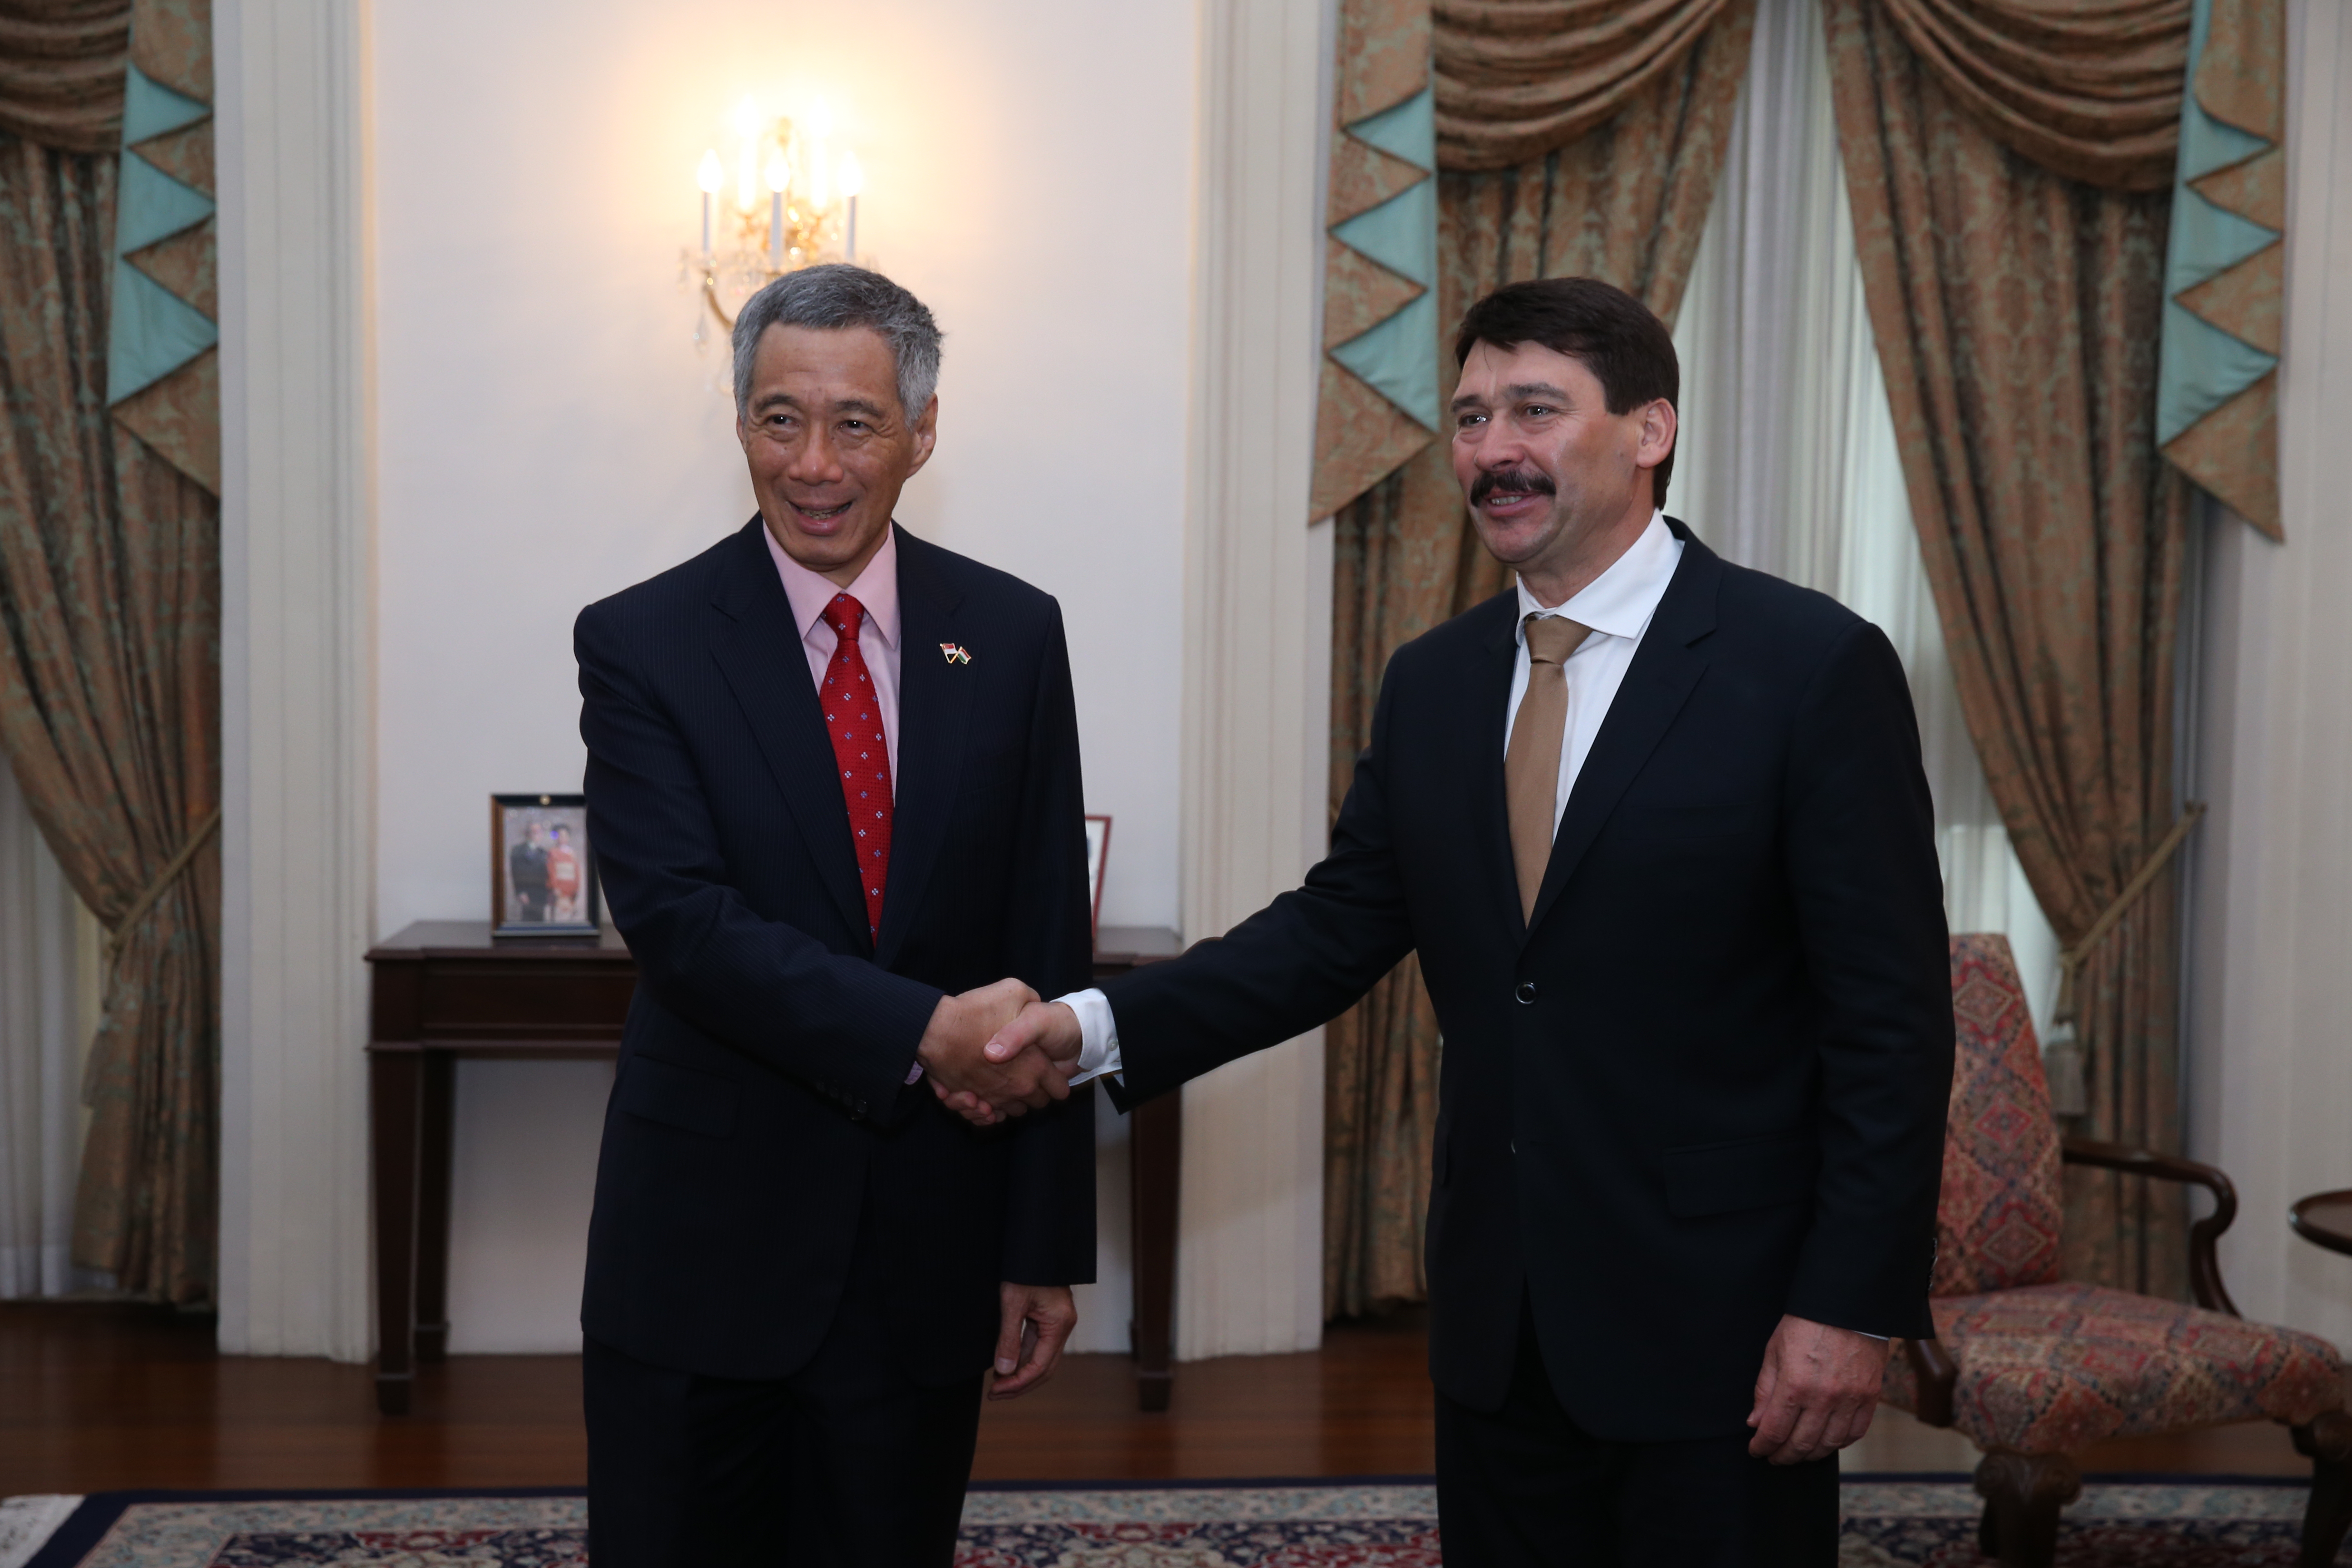 Call on Prime Minister Lee Hsien Loong by Prime Minister of Hungary Dr János Áder at the Istana on 9 Apr 2015 (MCI Photo by LH Goh)